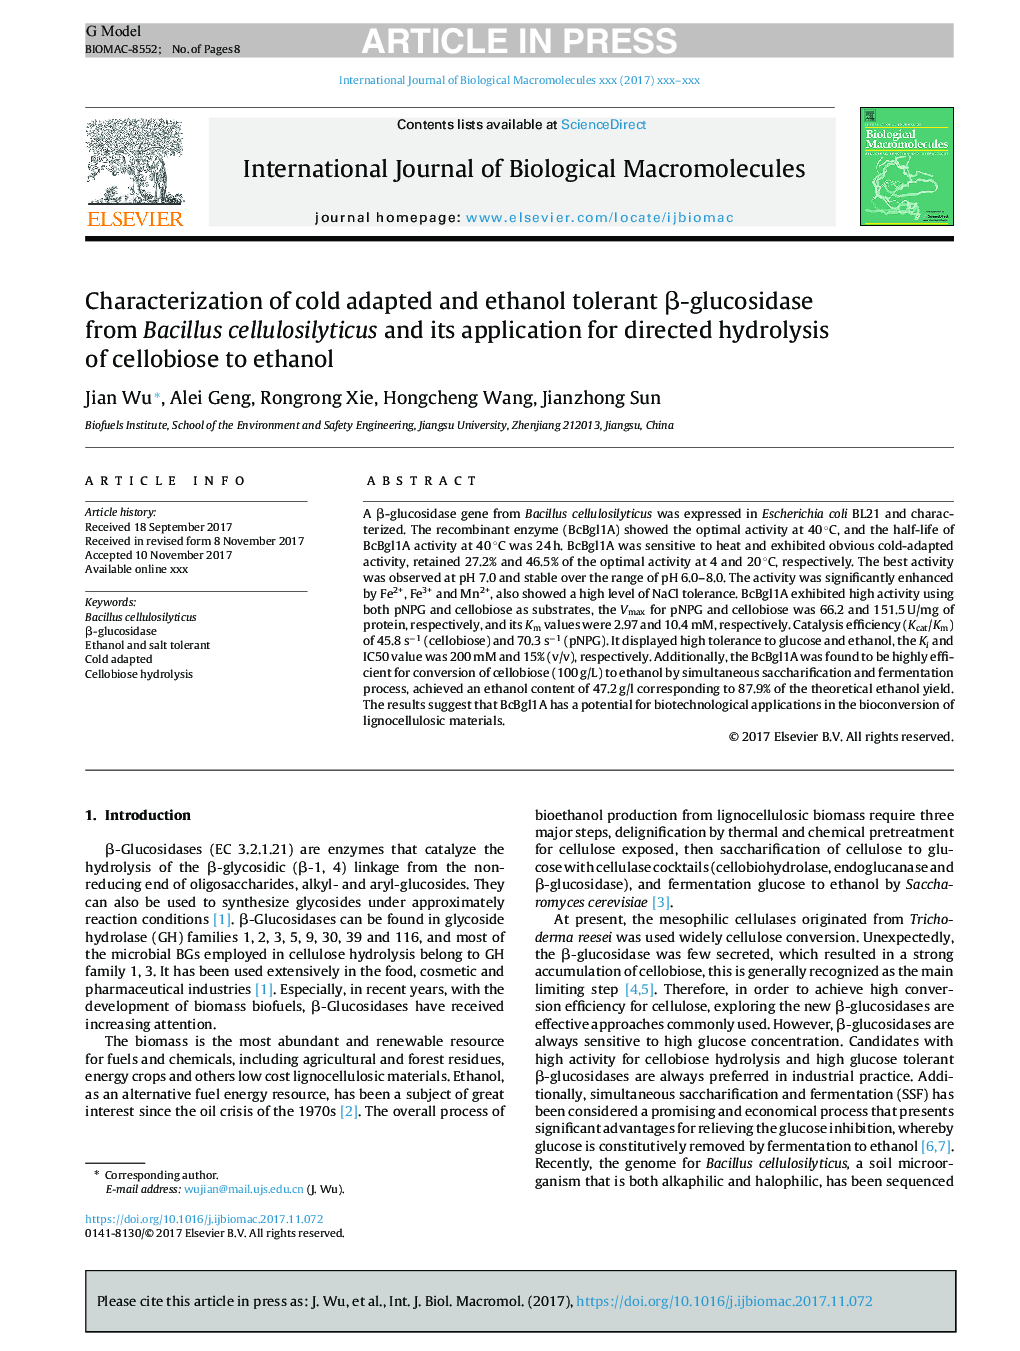 Characterization of cold adapted and ethanol tolerant Î²-glucosidase from Bacillus cellulosilyticus and its application for directed hydrolysis of cellobiose to ethanol